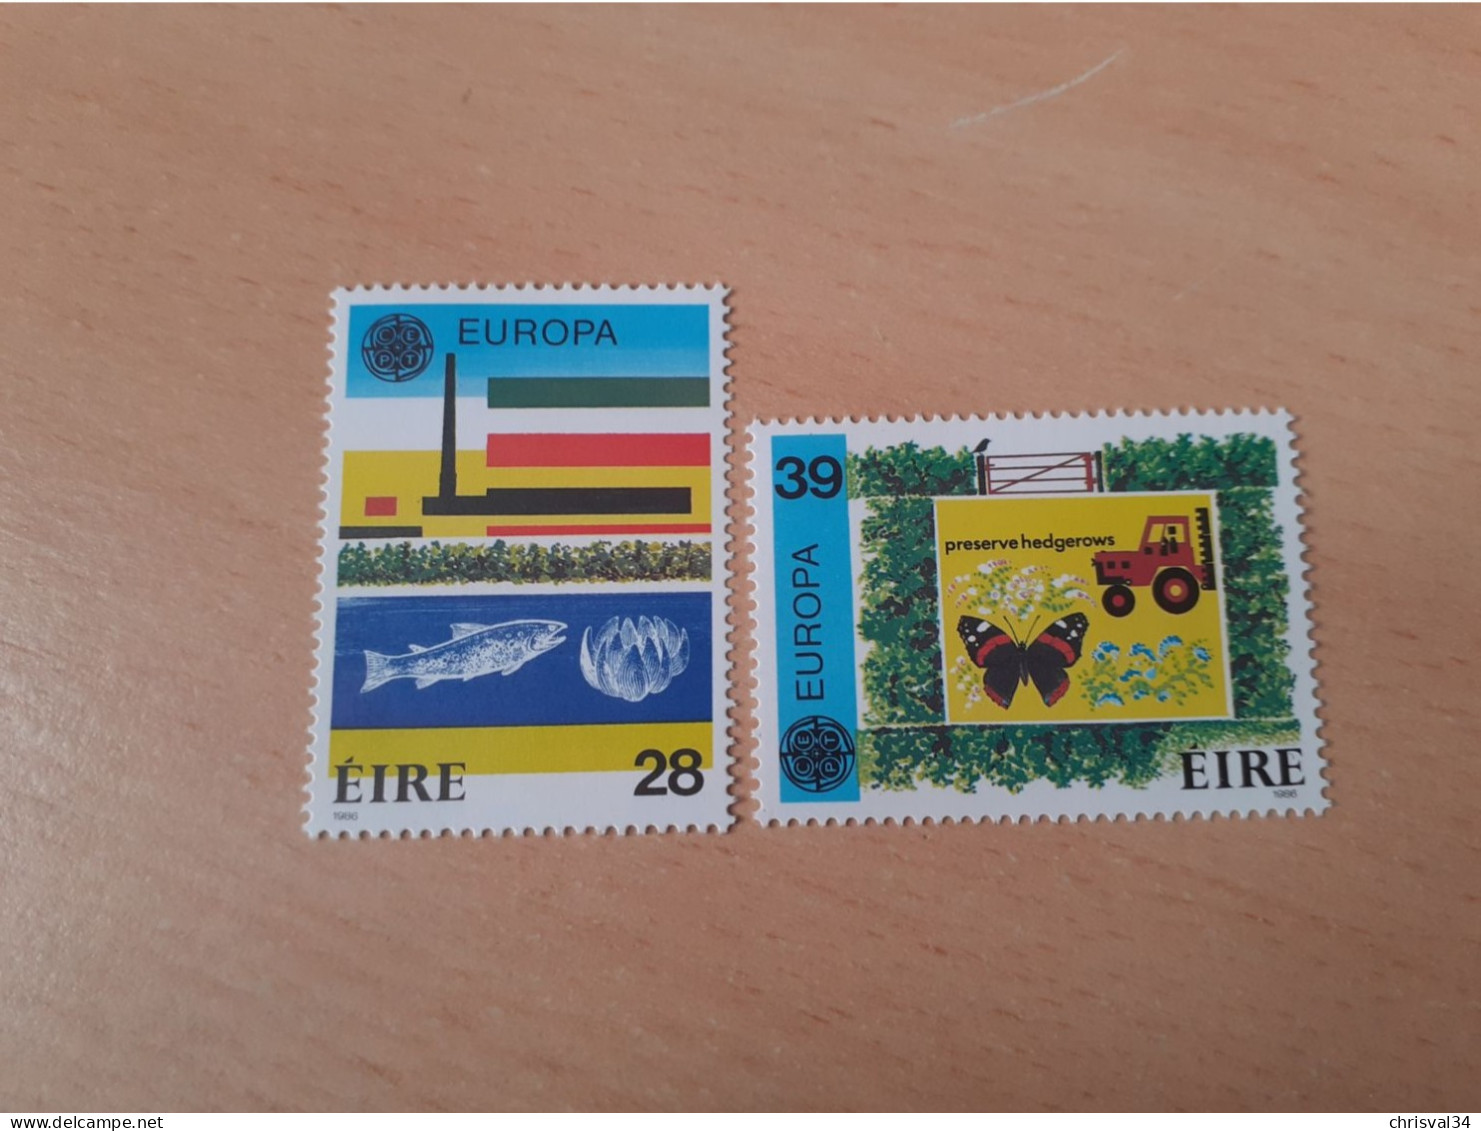 TIMBRES  IRLANDE    ANNEE   1986   N  592  /  593     NEUFS  LUXE** - Neufs